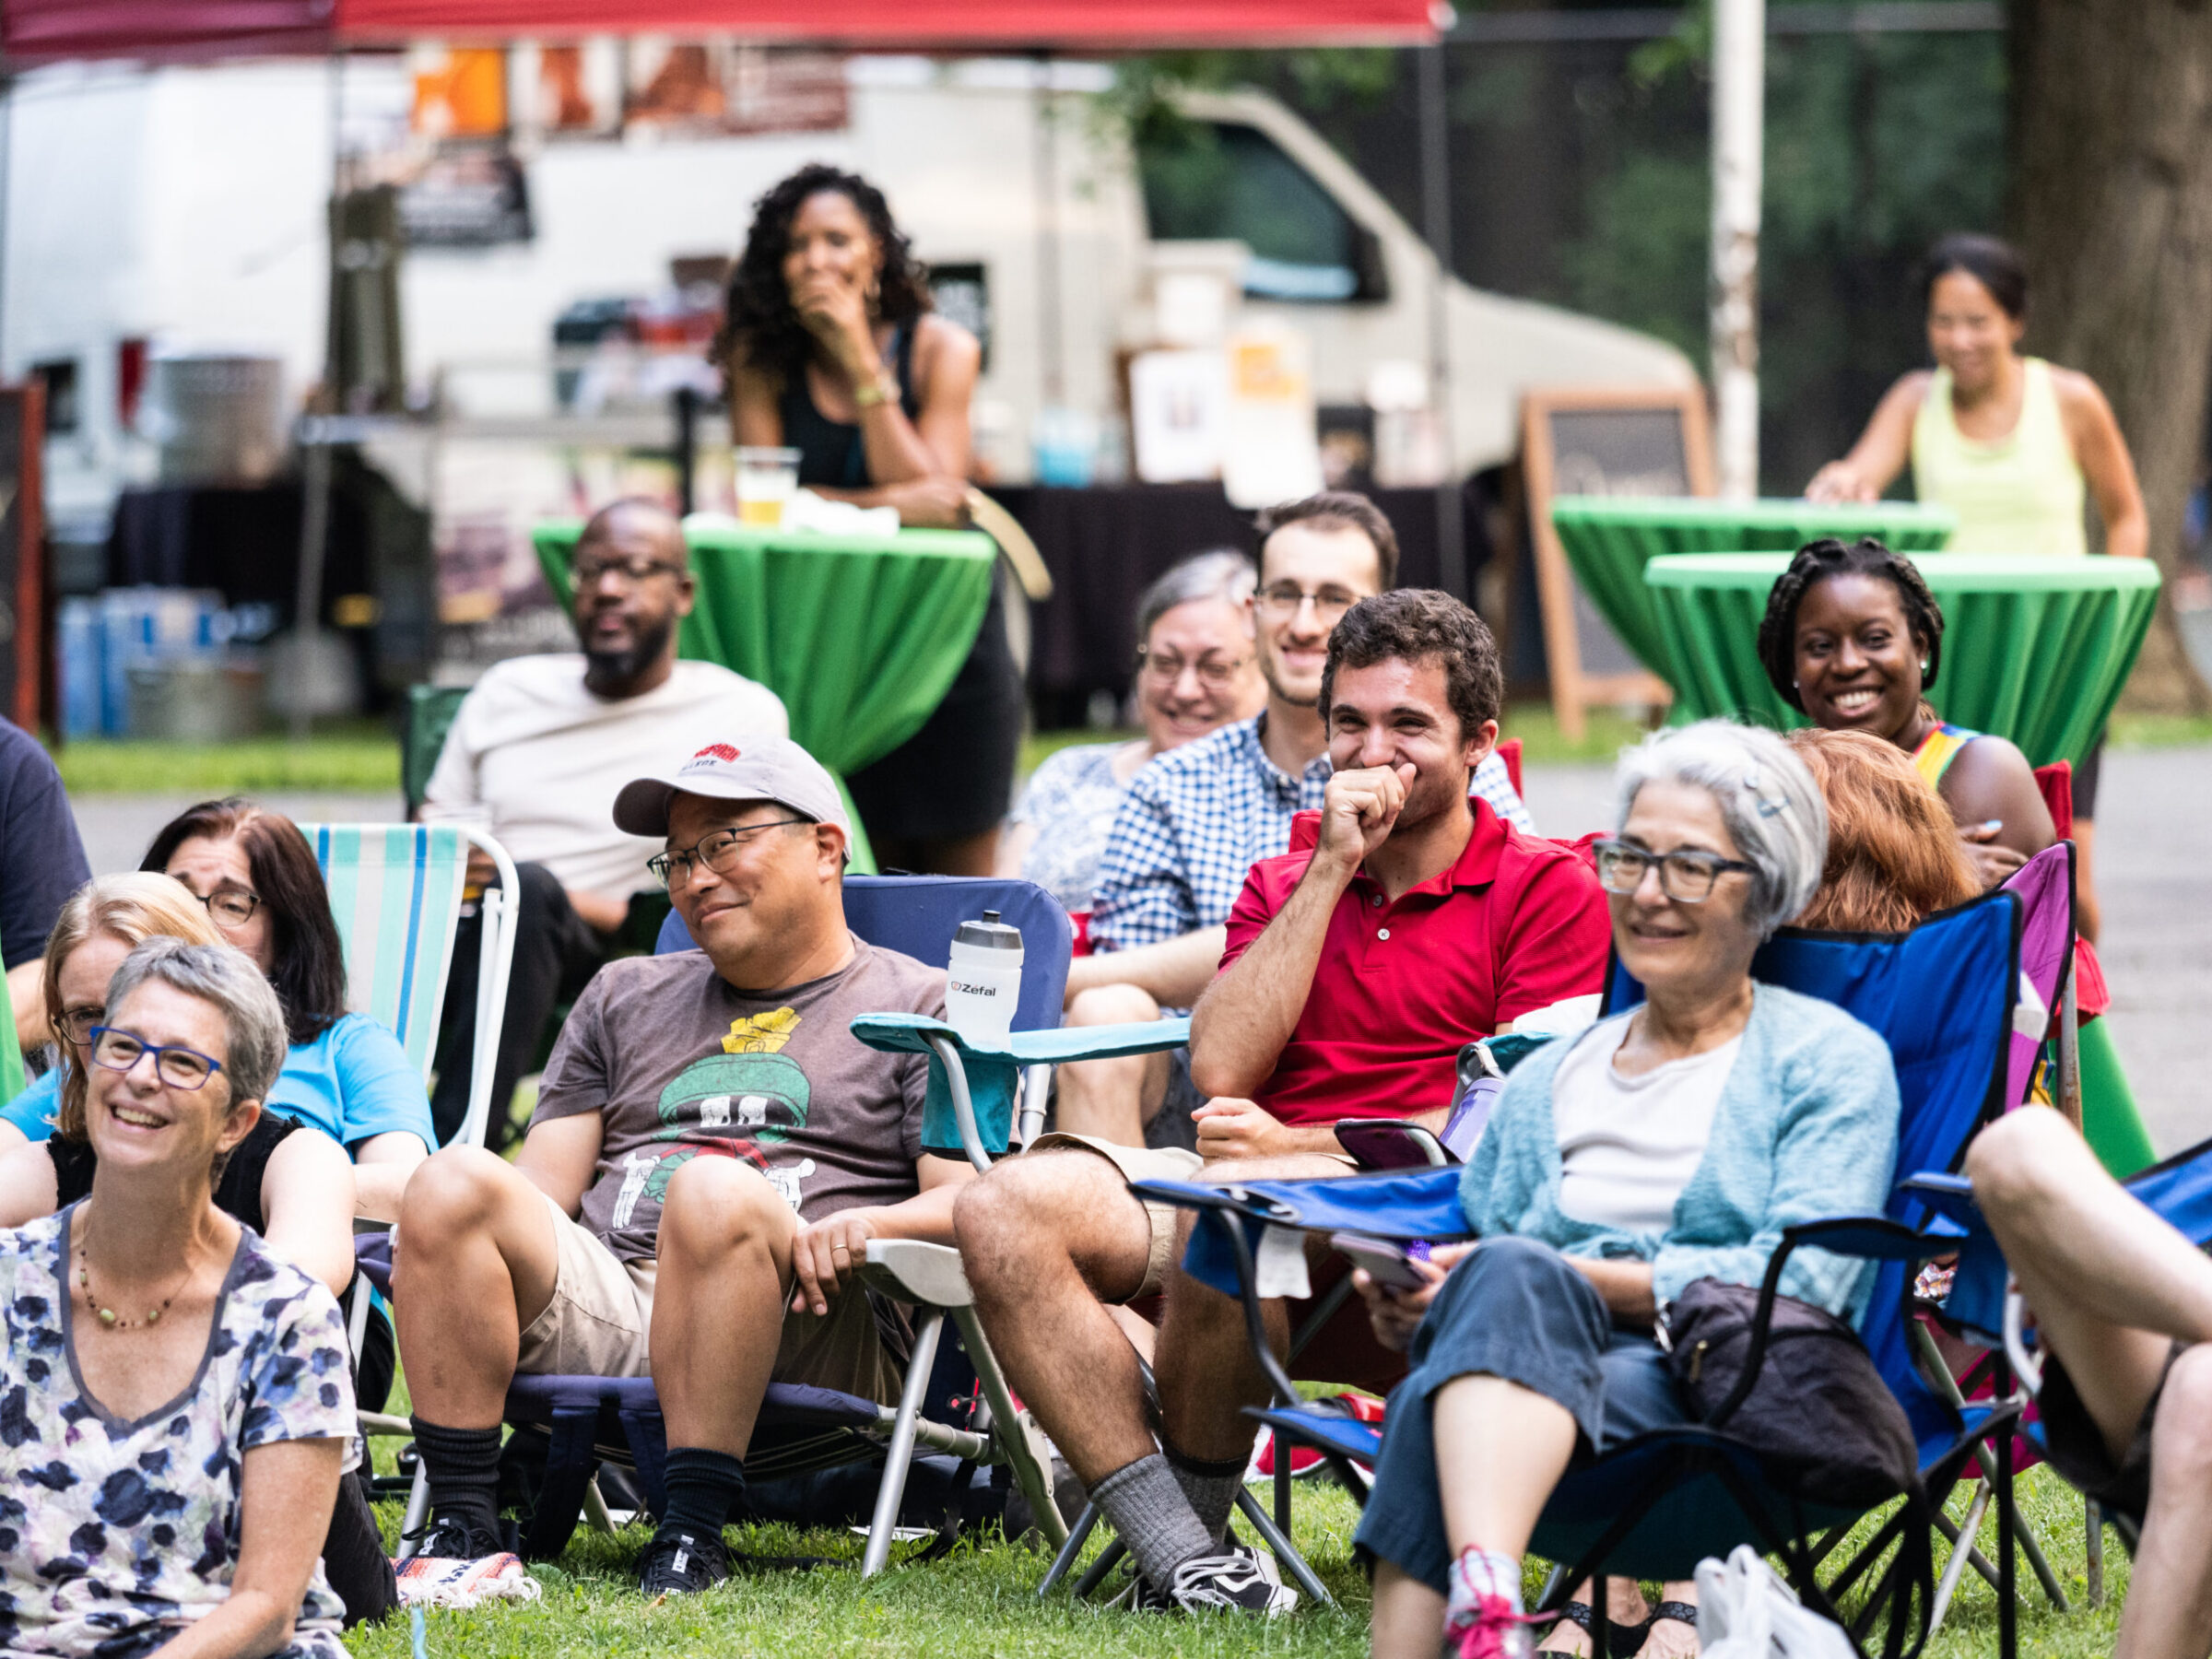 Parks Playhouse Comedy at Long-Branch Arliss Neighborhood park in July 2022